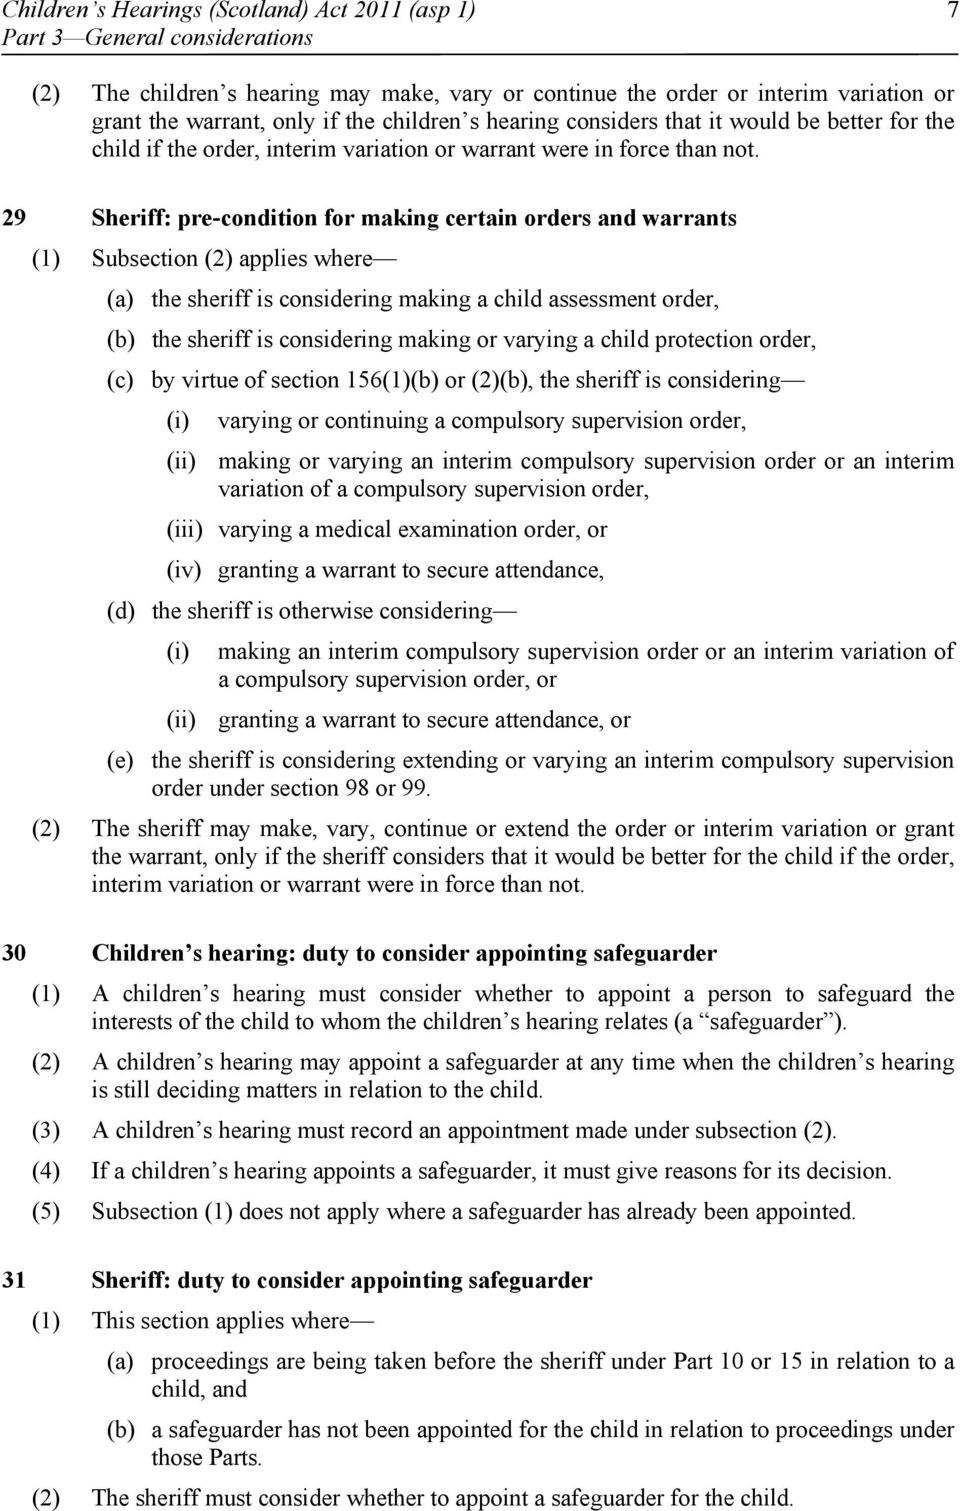 29 Sheriff: pre-condition for making certain orders and warrants (1) Subsection (2) applies where (a) the sheriff is considering making a child assessment order, (b) the sheriff is considering making